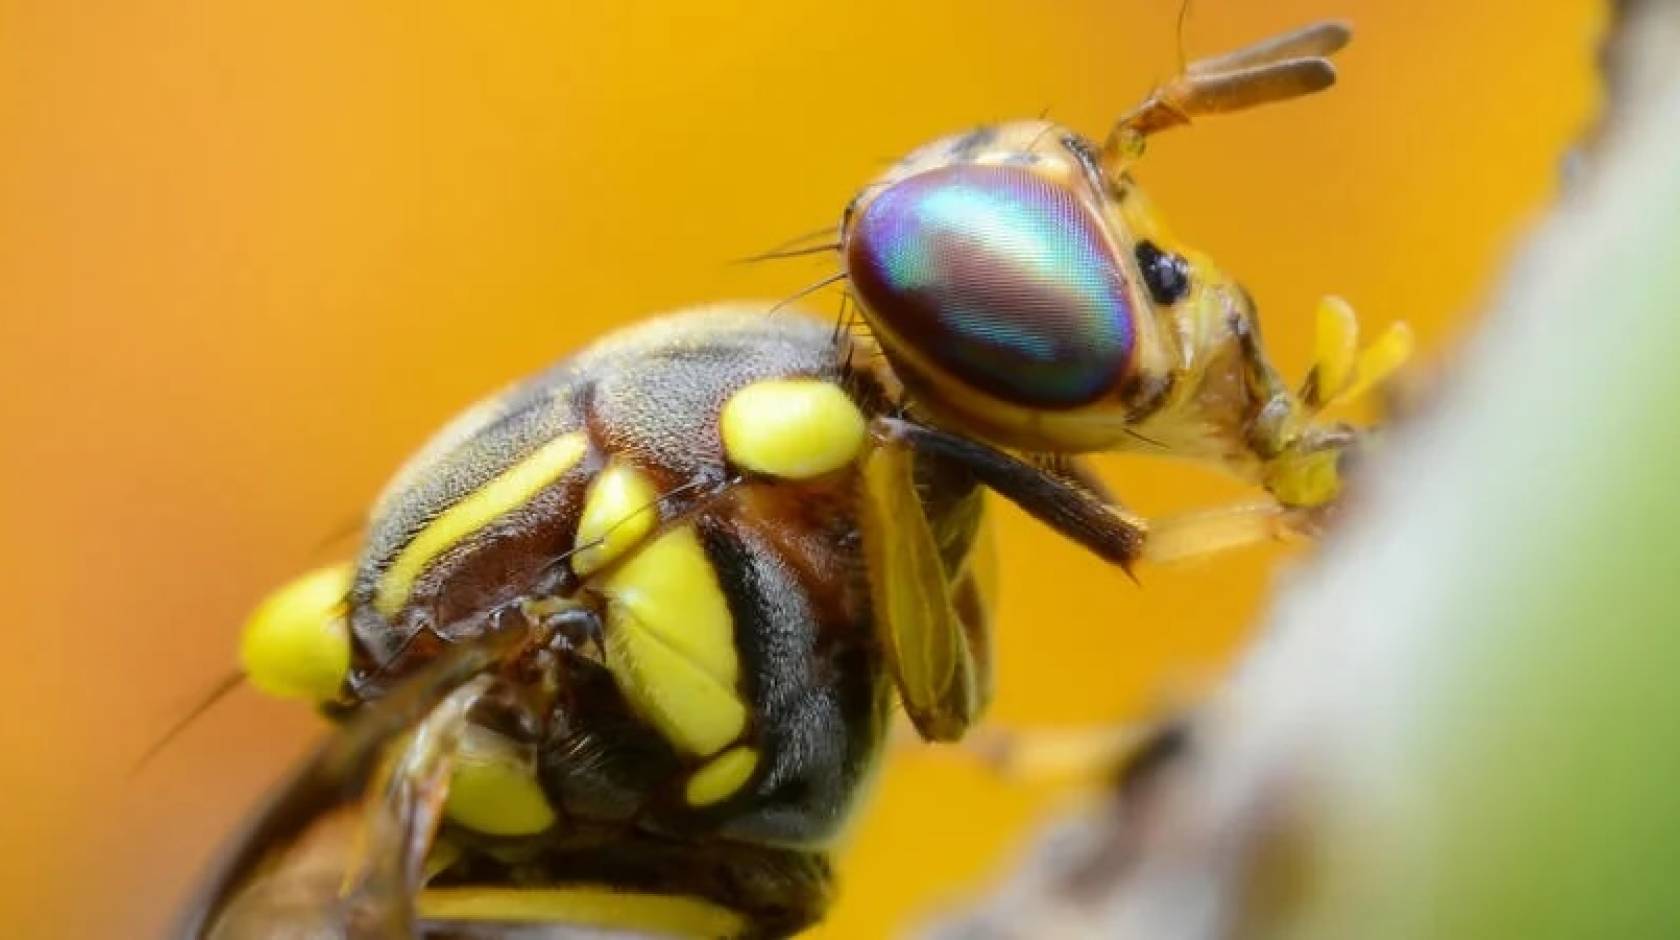 A macro image of a fruit fly with its proboscis inserted into a plant